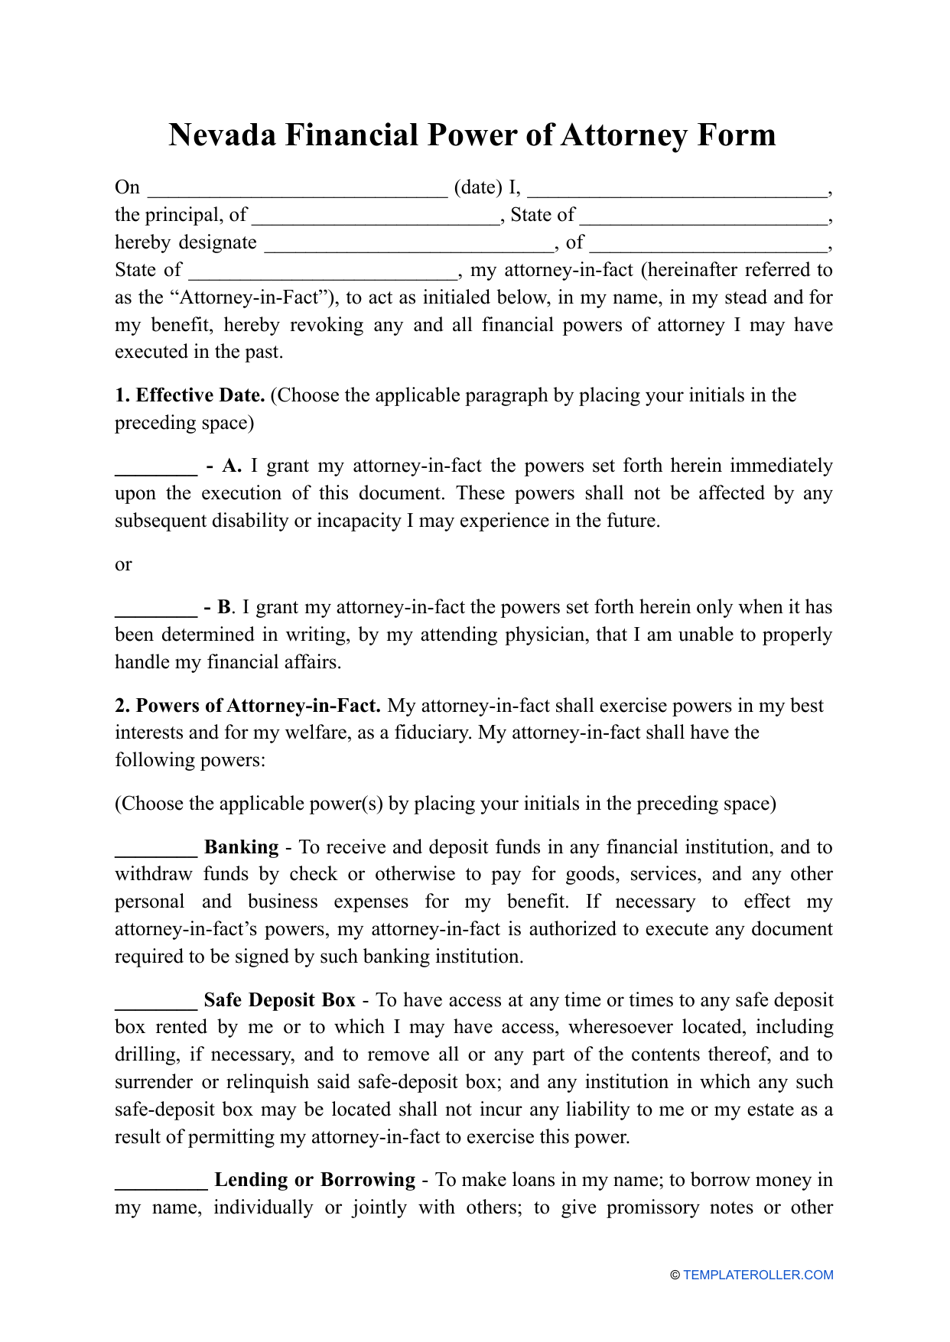 Financial Power of Attorney Form - Nevada, Page 1